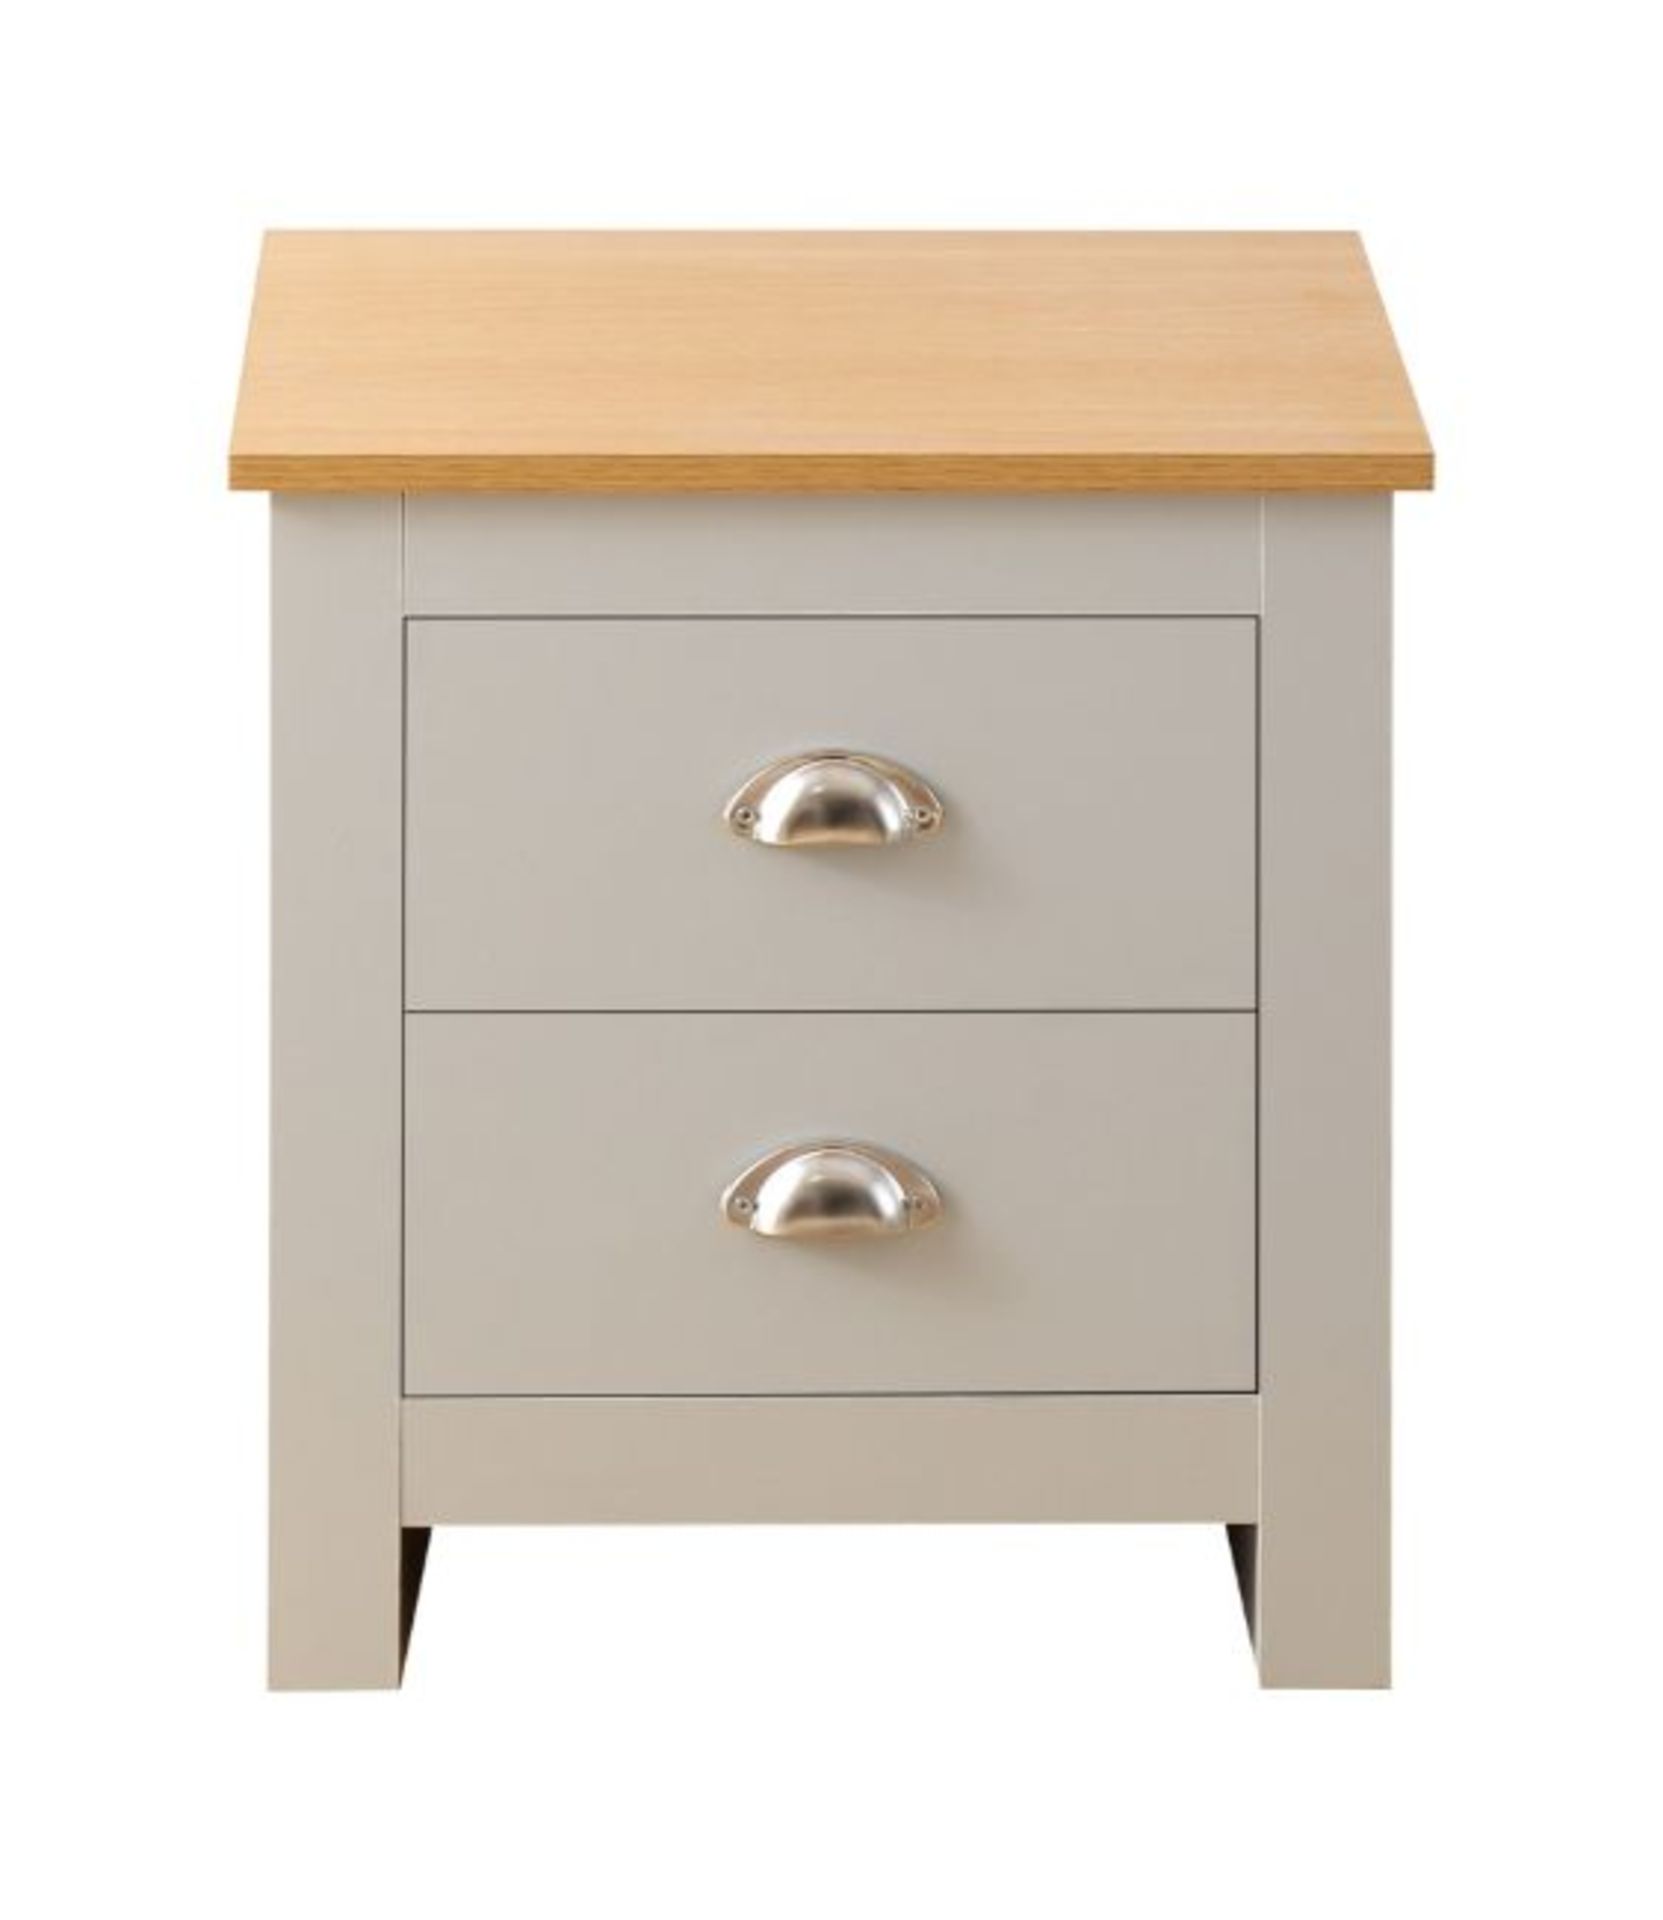 JOB LOT 10 X GREY WITH OAK TOP SHAKER-INSPIRED STYLISH DESIGN BEDSIDES - Image 2 of 4